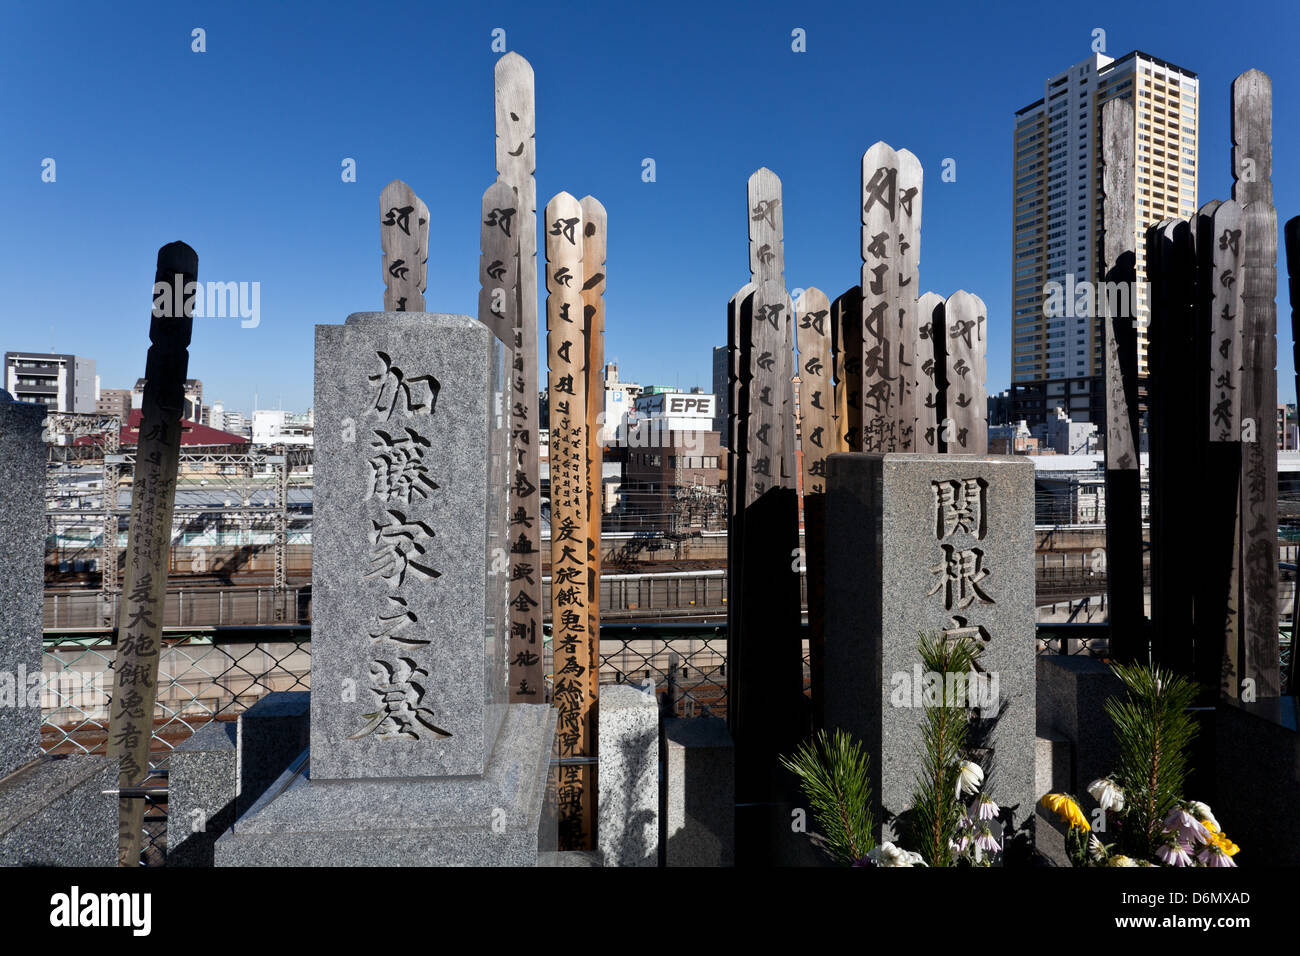 Toba wooden tablets and graves headstones in Yanaka cemetery, Nippori, Tokyo, Japan. Stock Photo